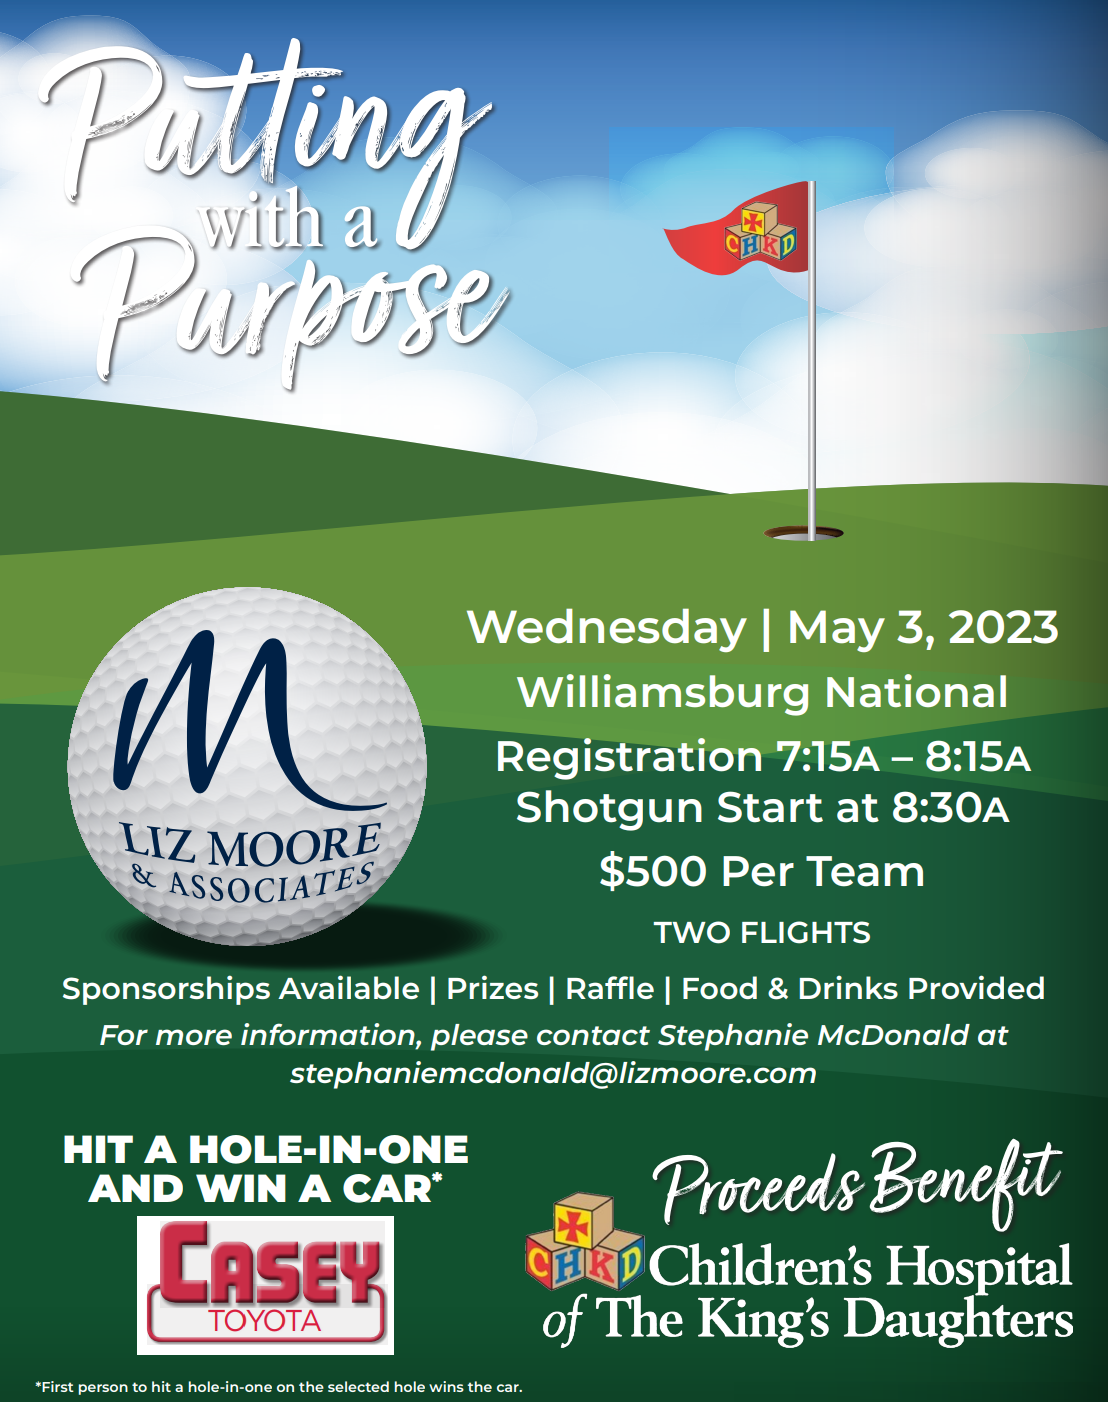 Liz Moore & Associates to Hold Charity Golf Tournament to Benefit Children’s Hospital of the King’s Daughters